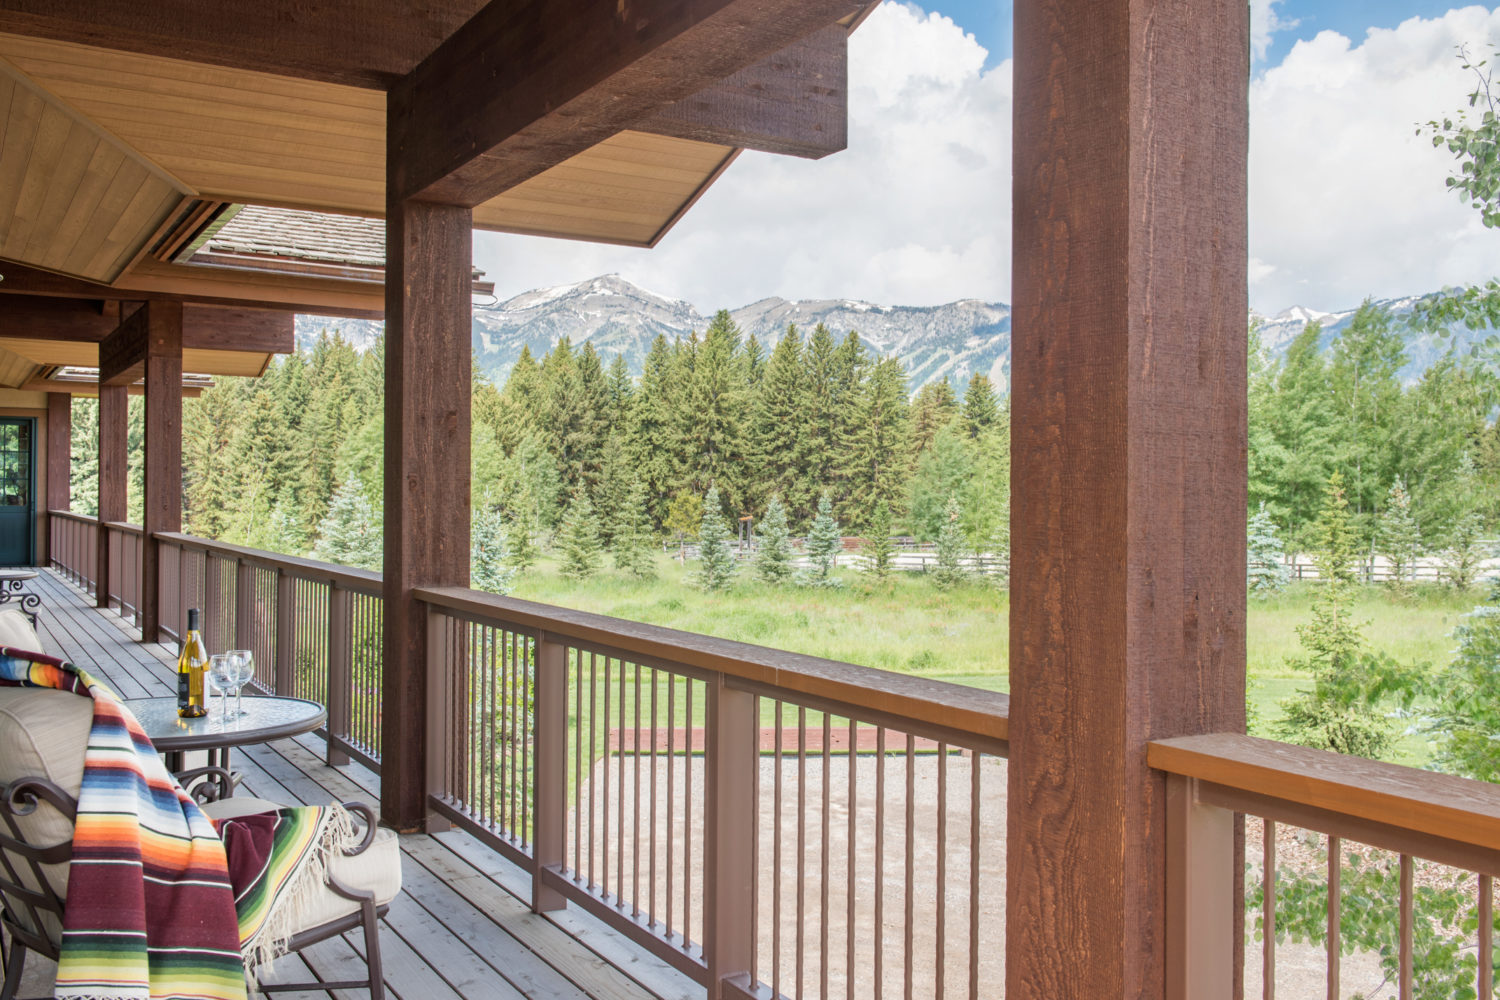 A balcony with furniture and views of trees and mountains